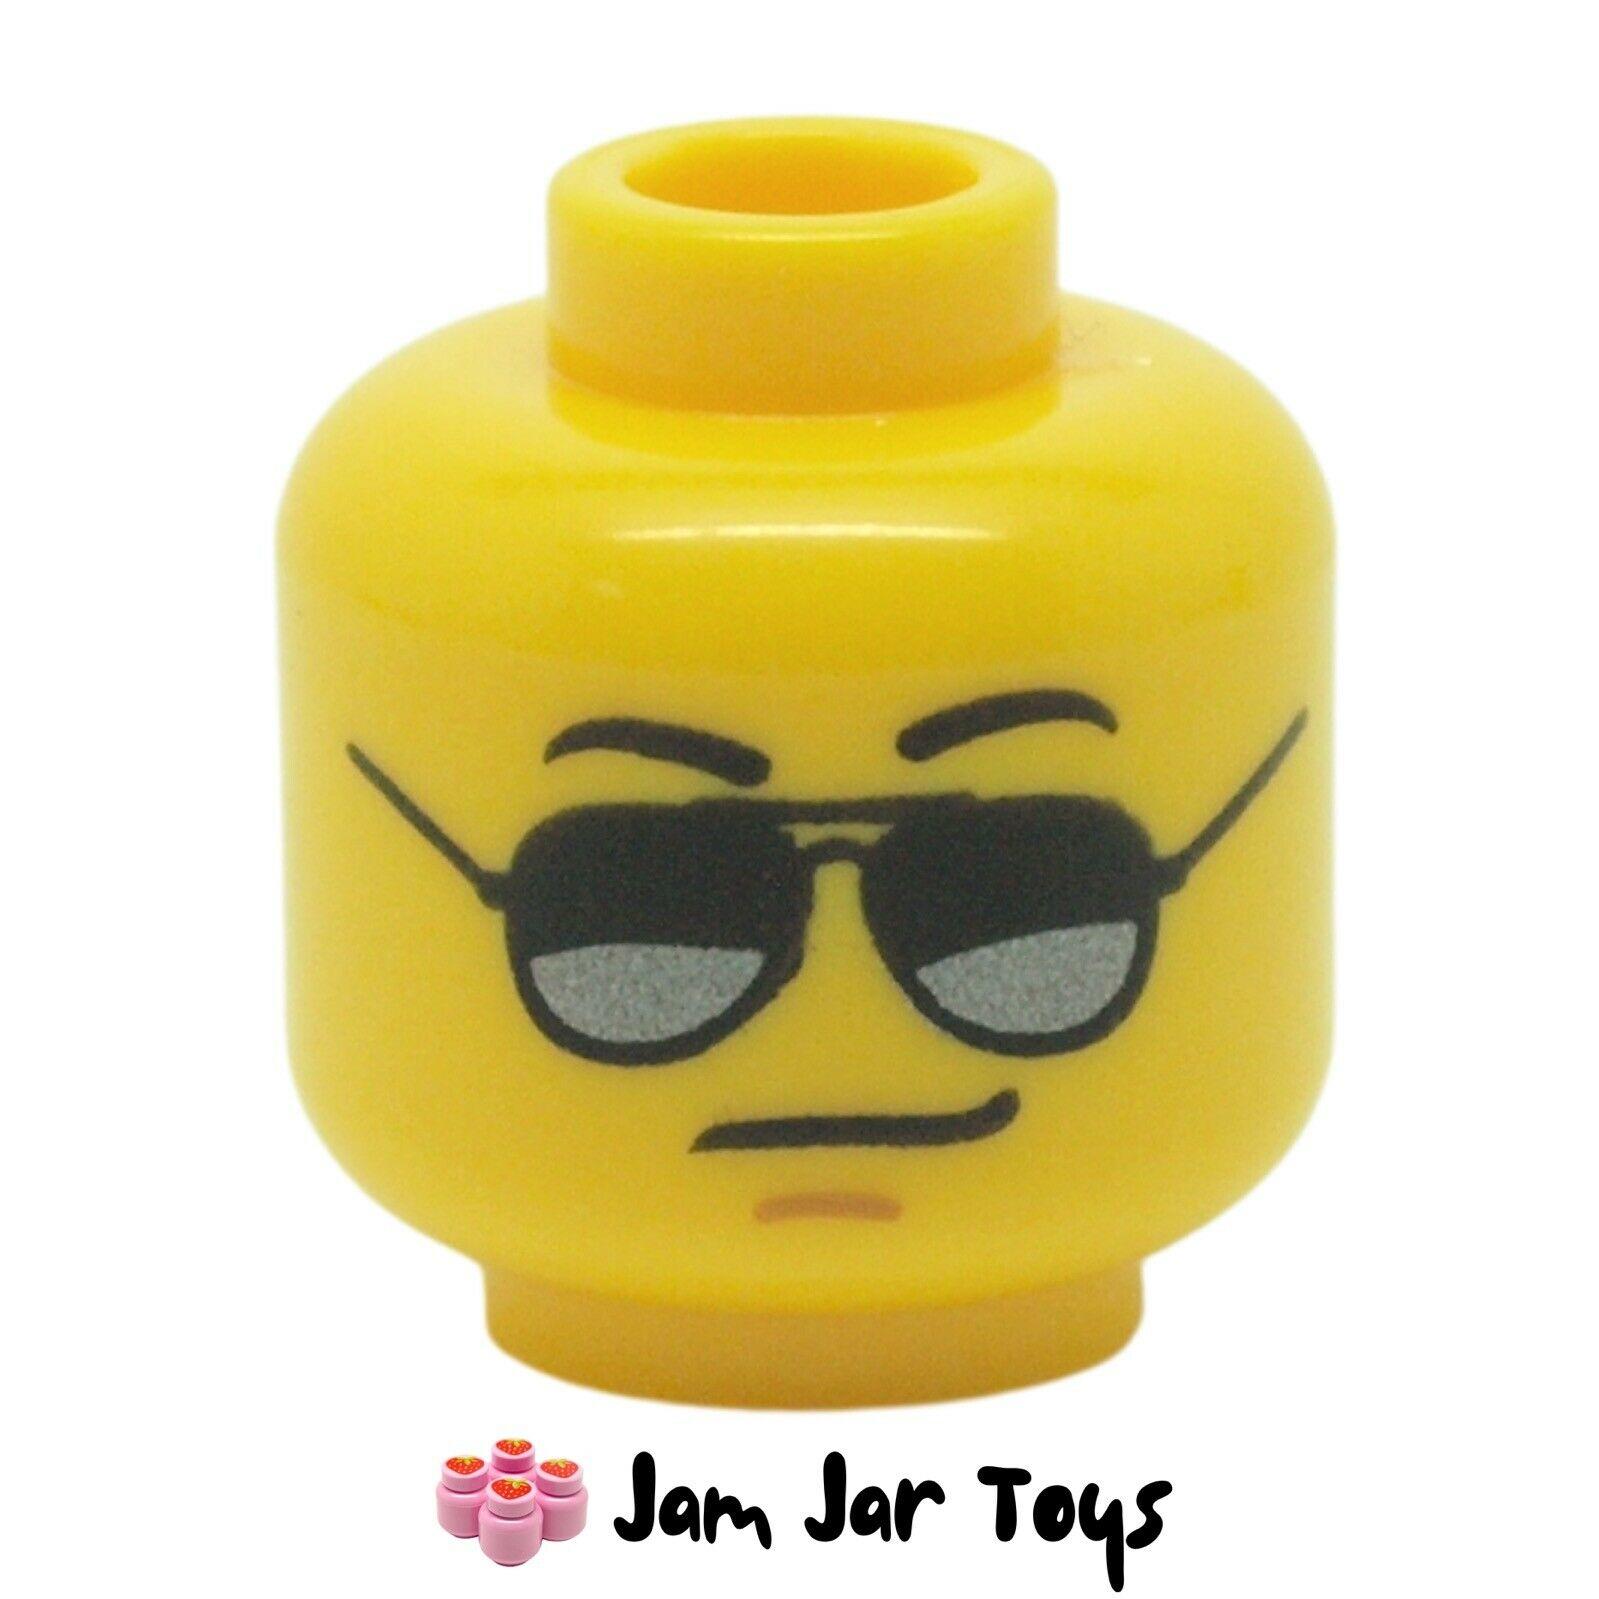 Lego New Yellow Minifigure Head Glasses with Black and Silver Sunglasses 